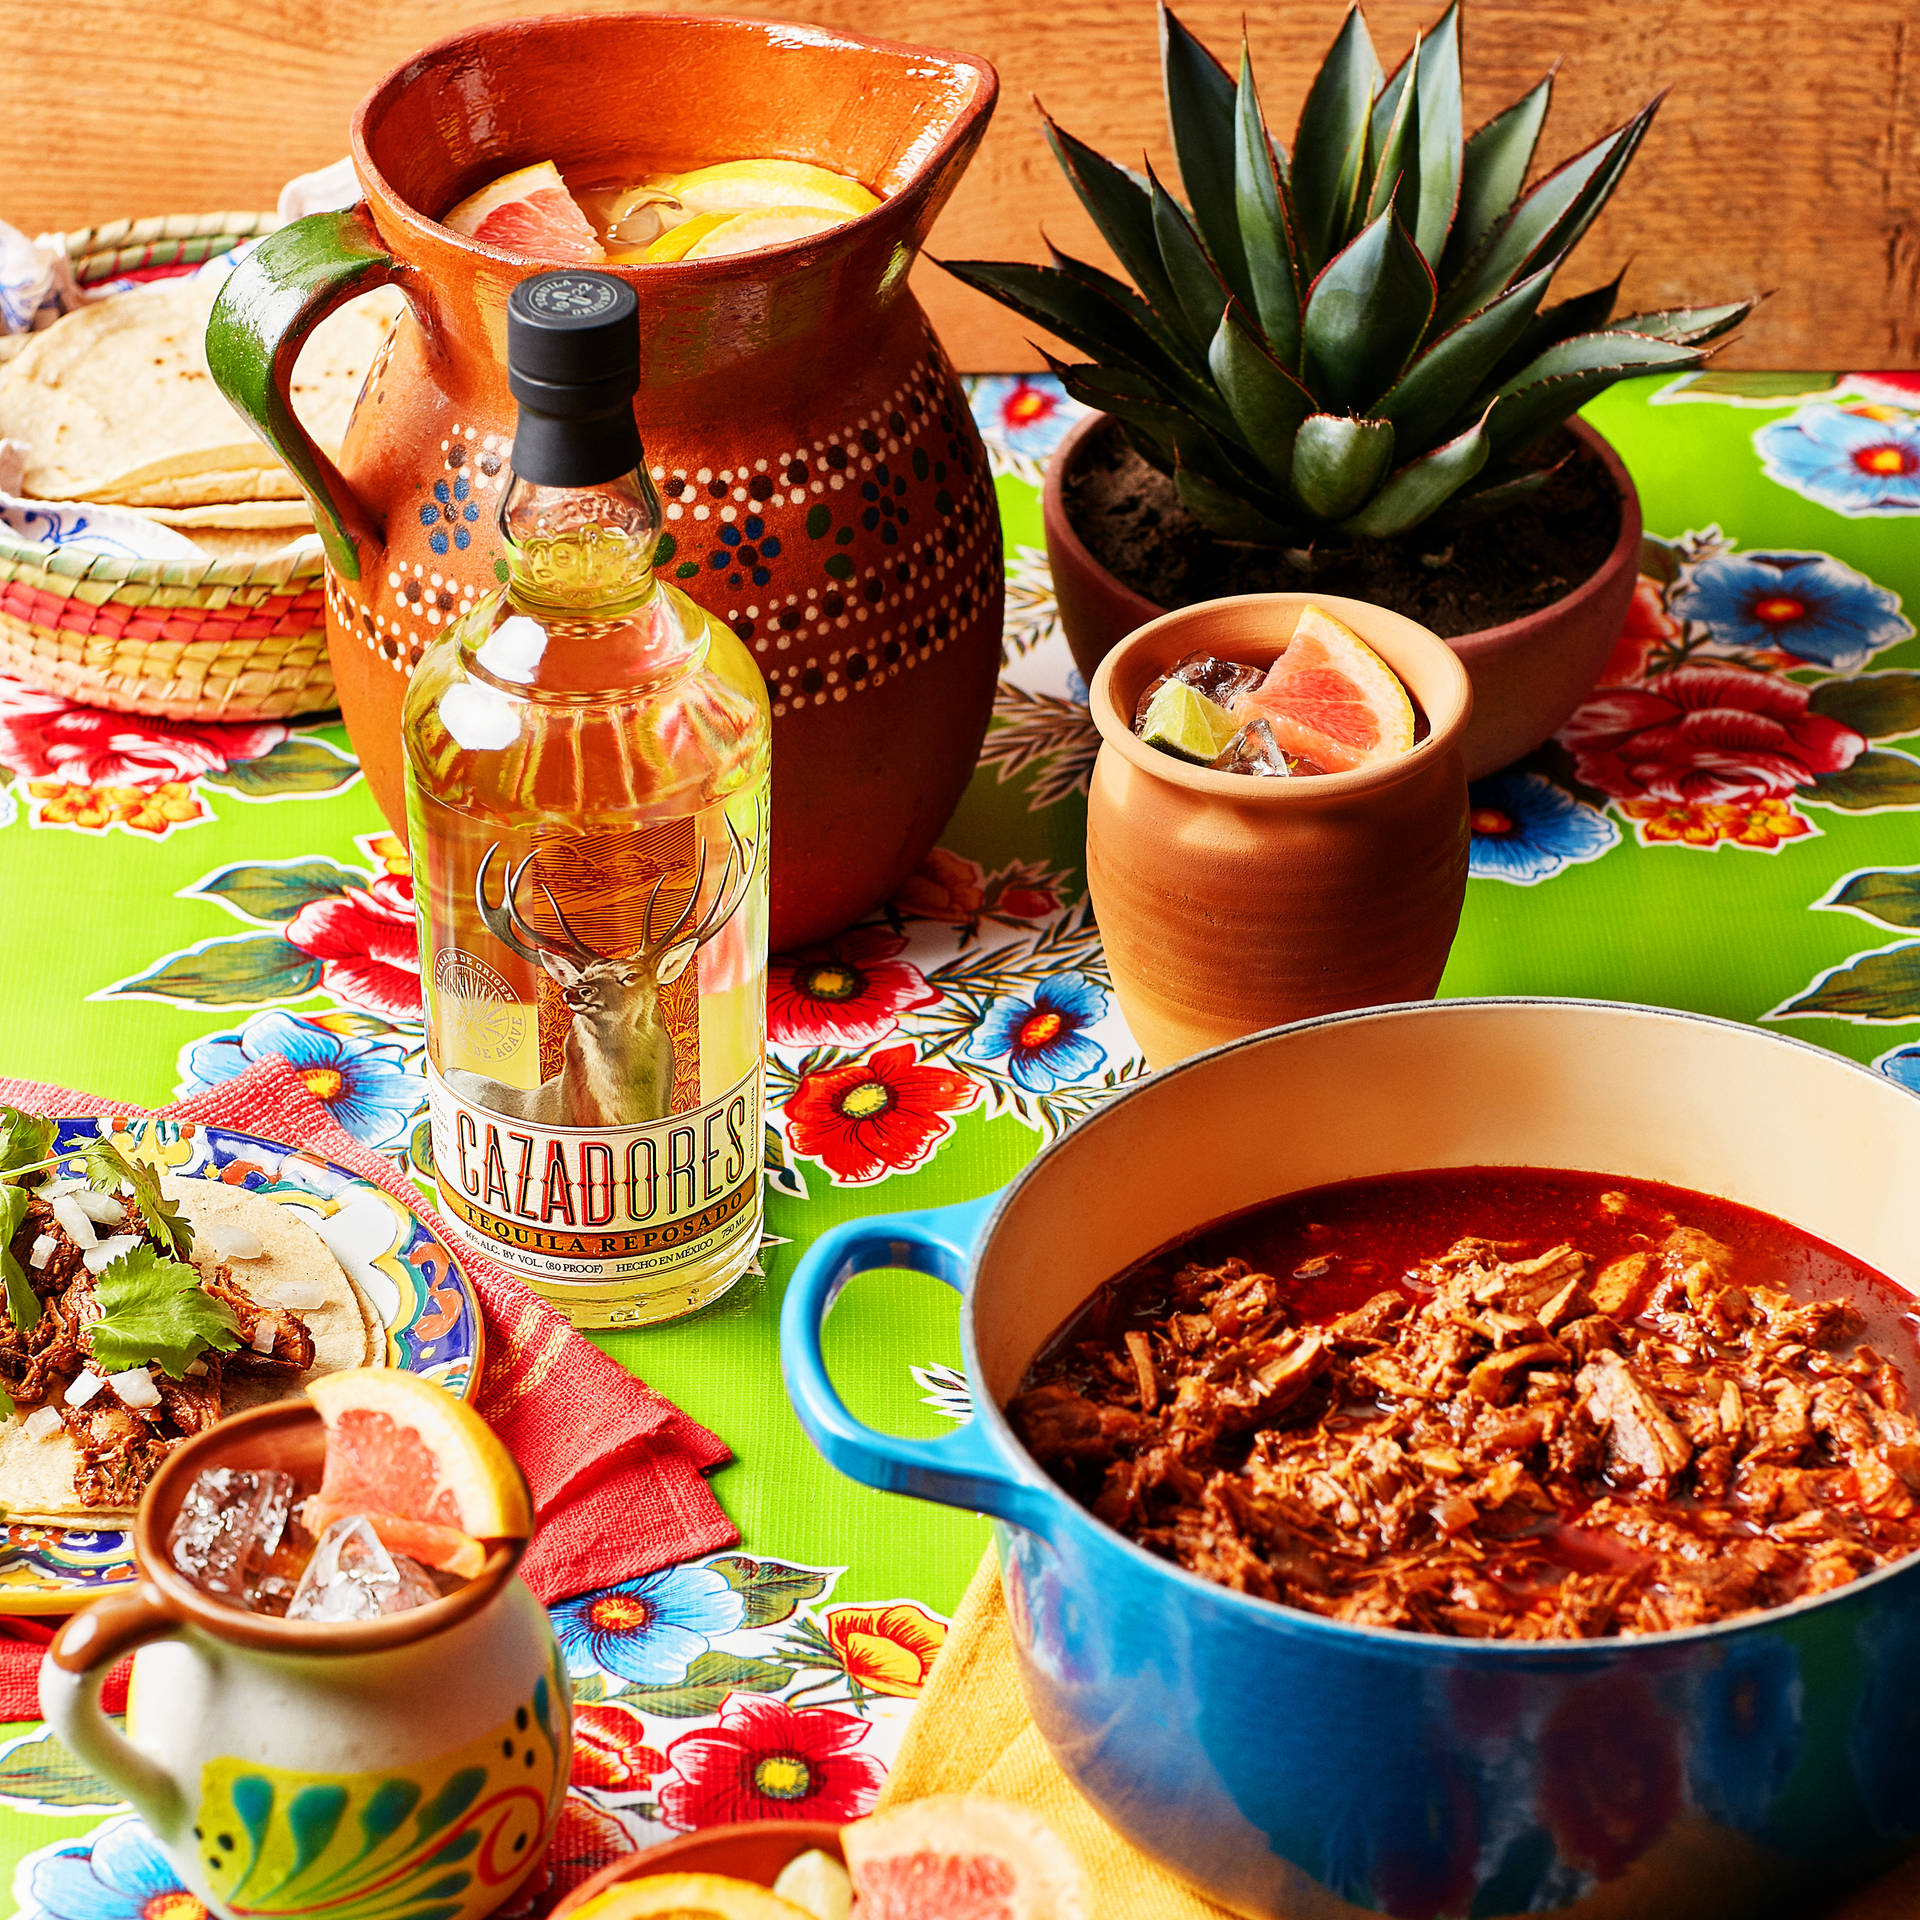 Yummy Foods With Cazadores Tequila Wallpaper